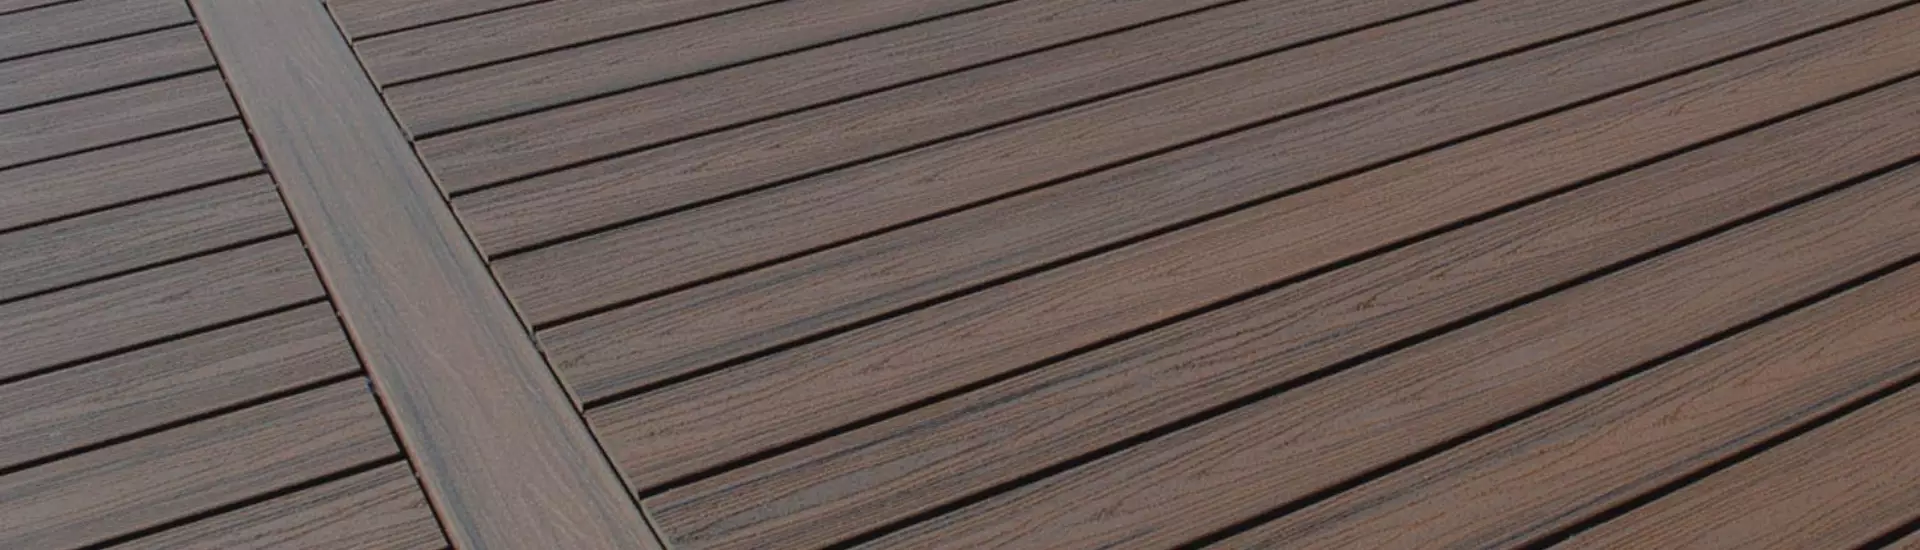 Snap-Loc for Modwood® Decking